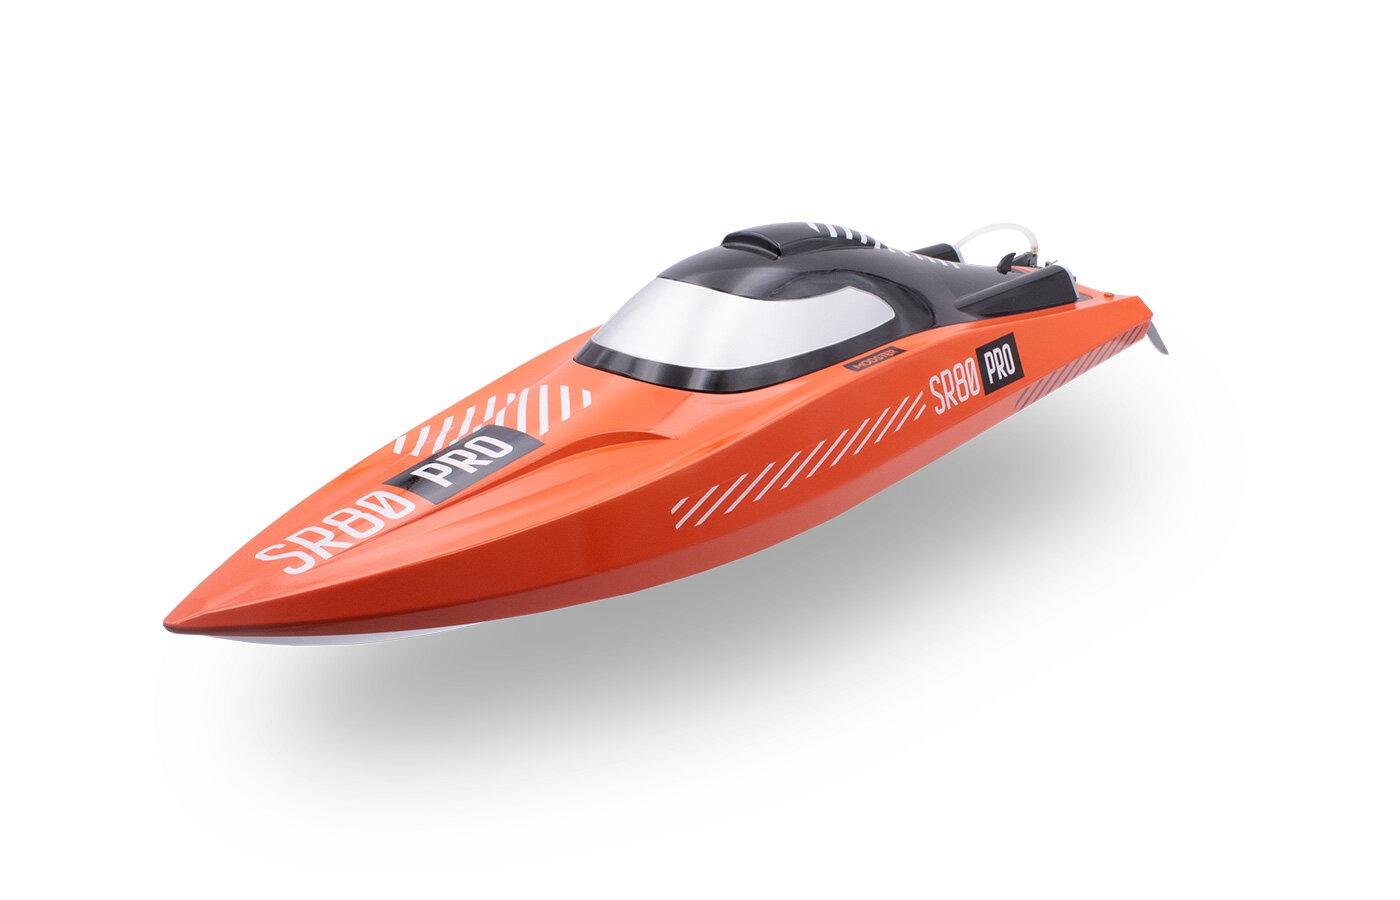 Remote Control Racing Boat: Join the excitement: Participate in remote control racing boat competitions worldwide.